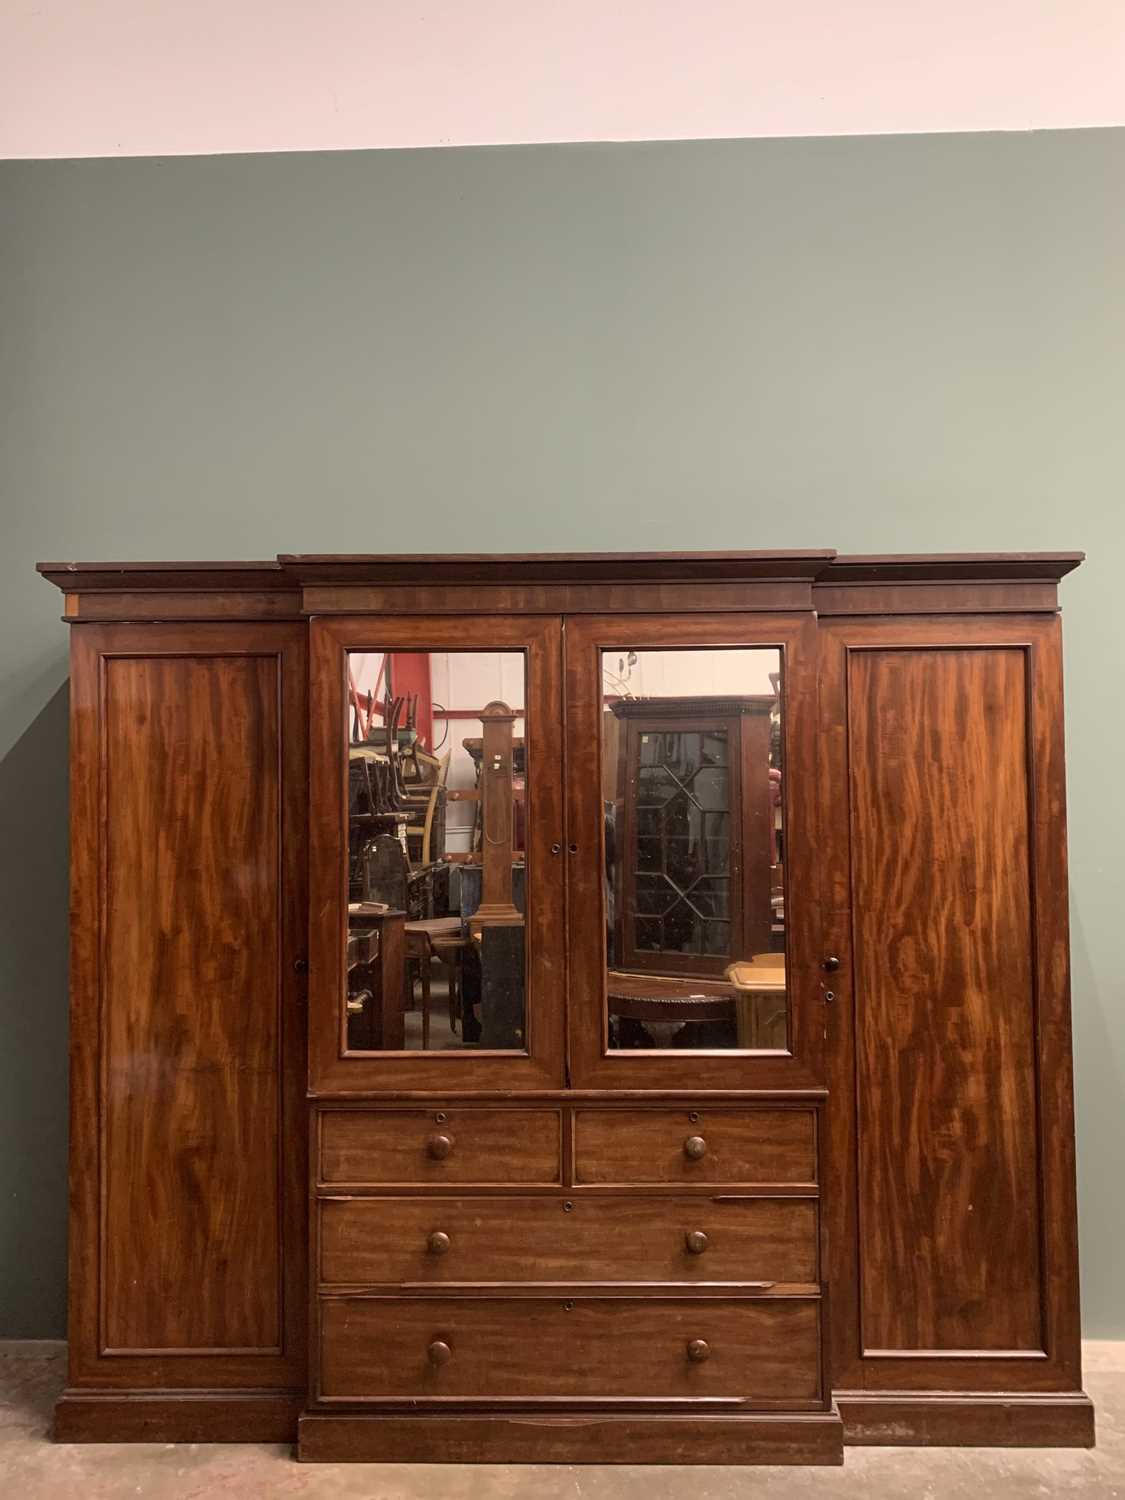 VICTORIAN MAHOGANY TRIPLE WARDROBE, breakfront middle section with twin glazed doors and interior - Image 3 of 8